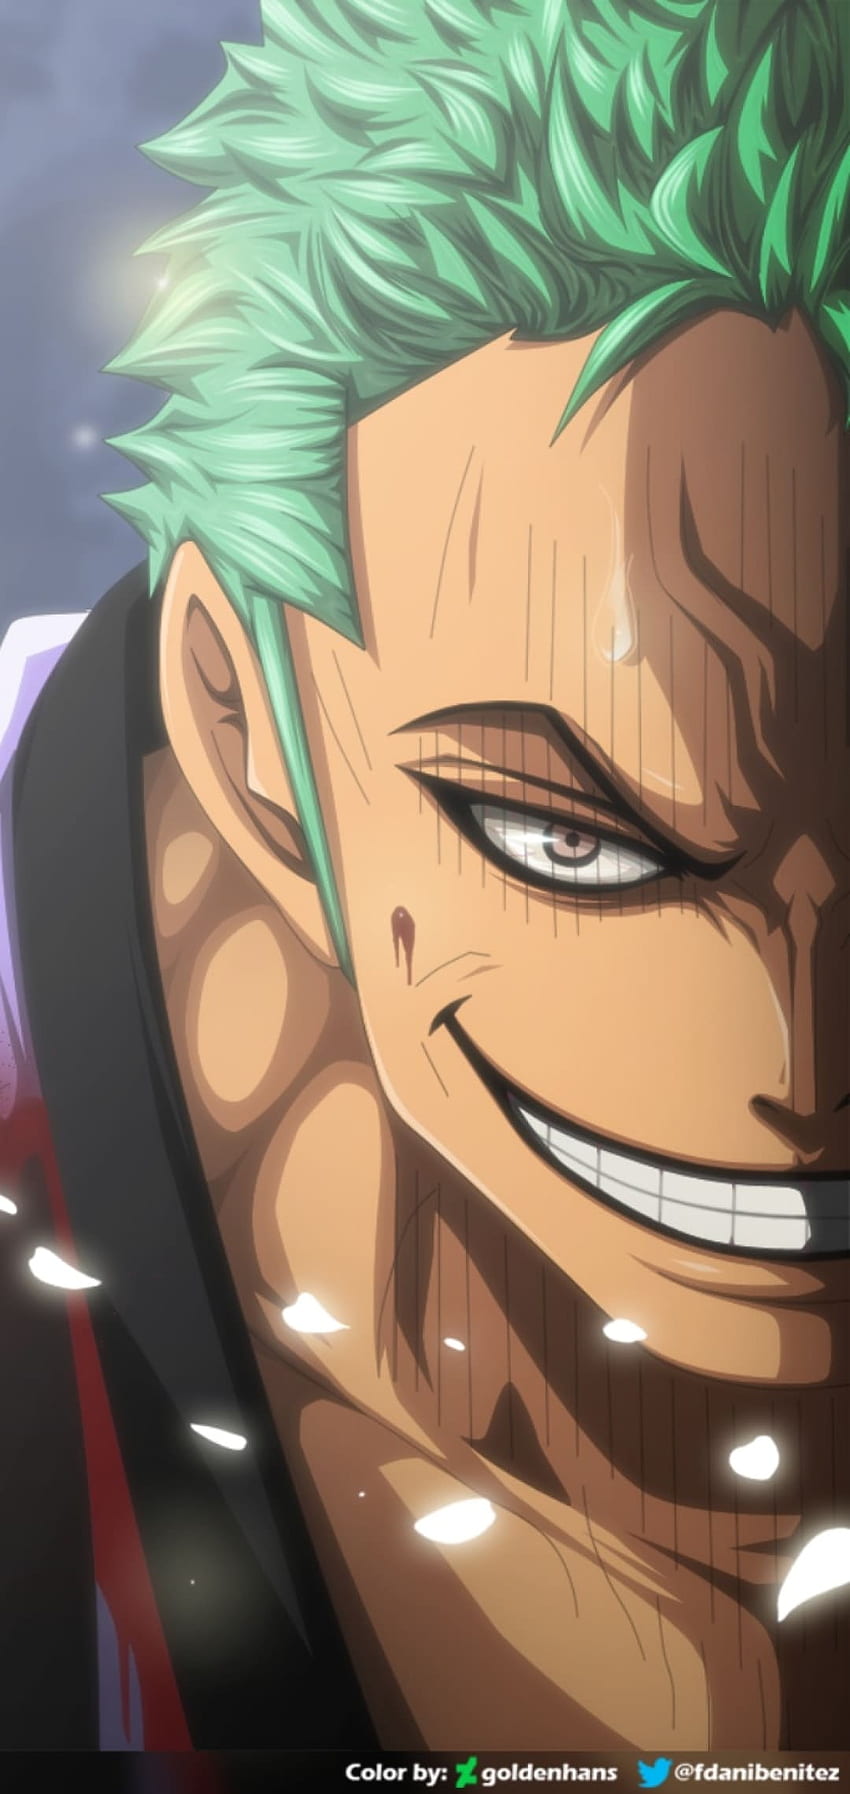 Zoro.to: World's Largest Pirate Site Suddenly 